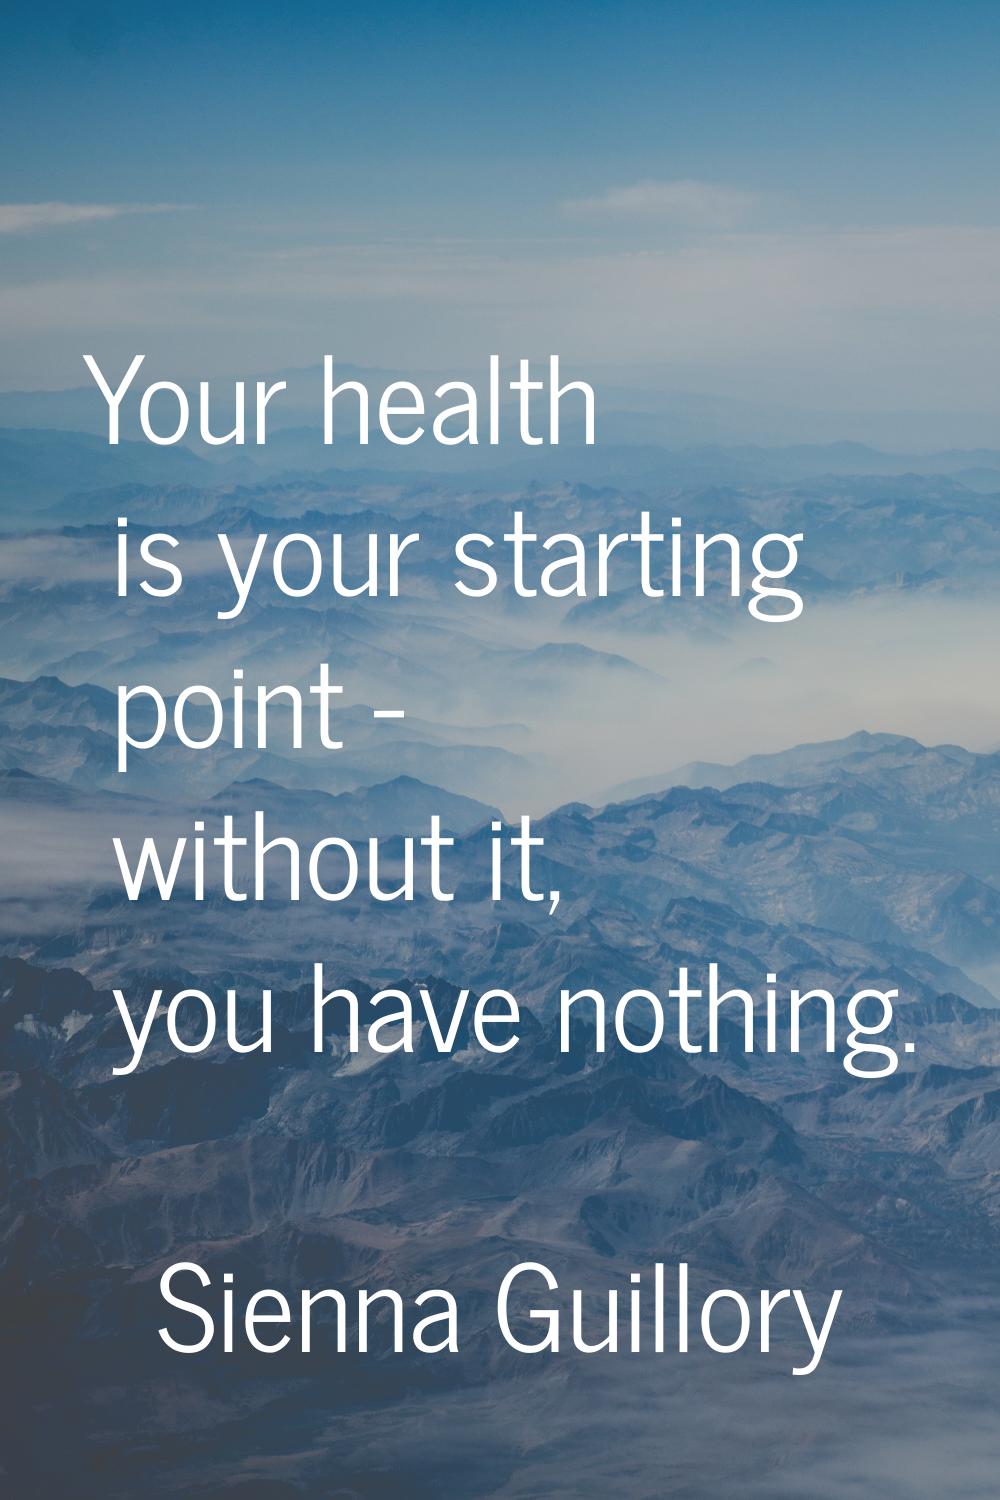 Your health is your starting point - without it, you have nothing.